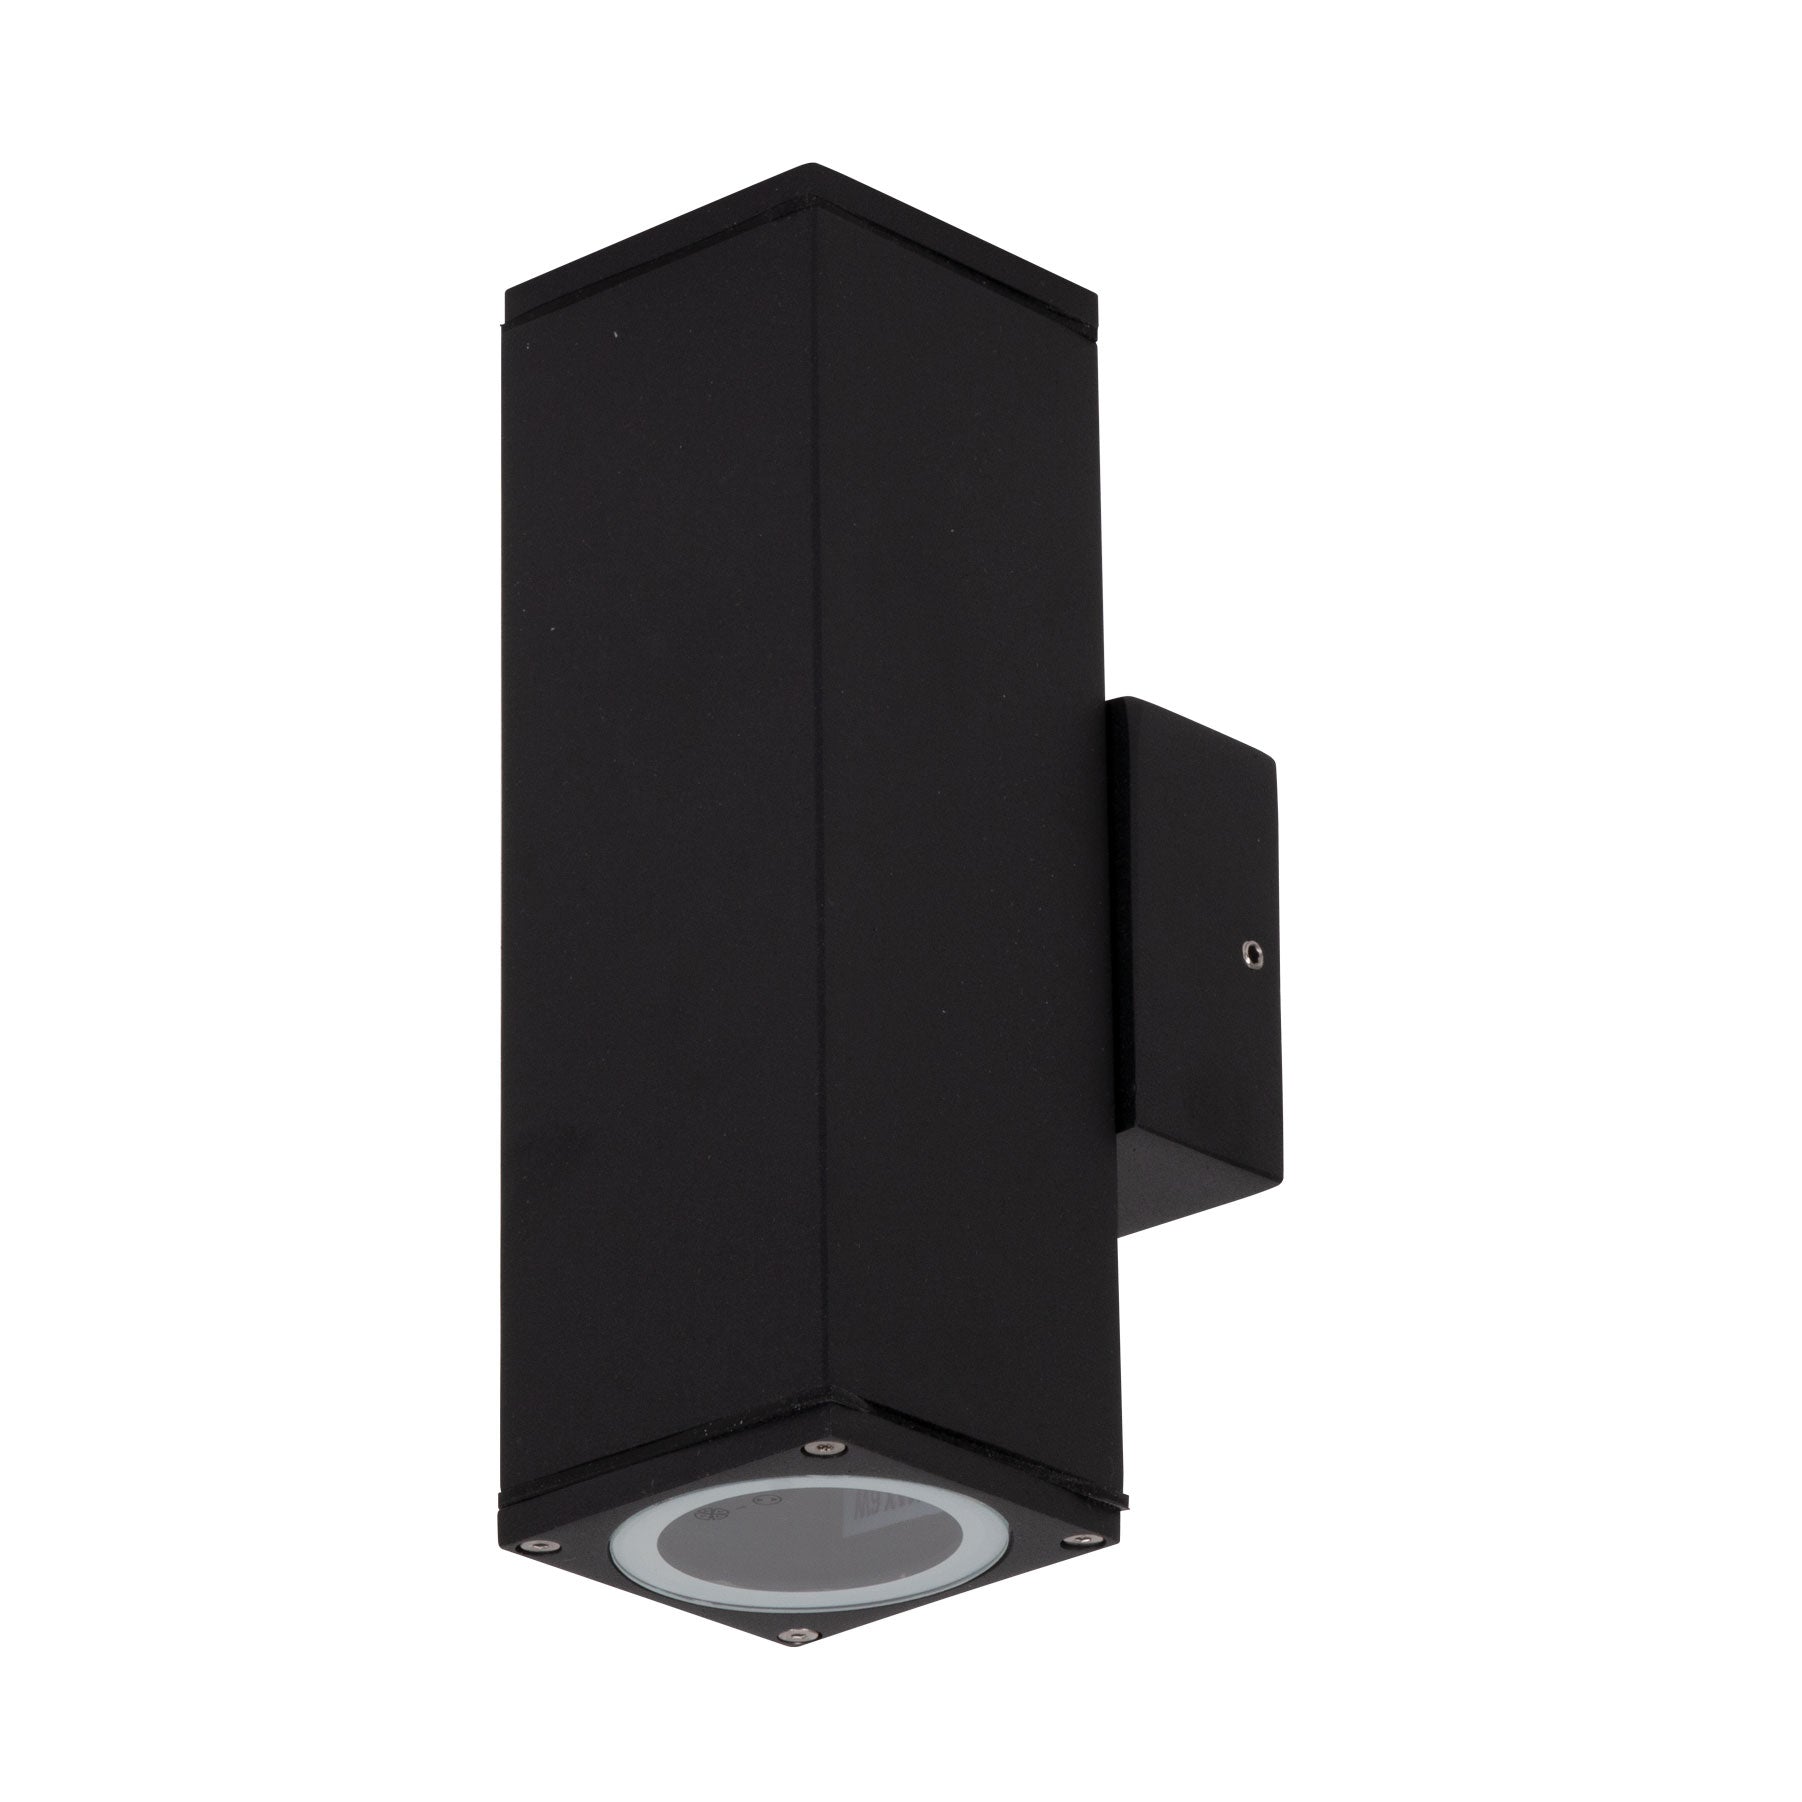 Domus Lighting Outdoor Wall Lights Black / Tri-Colour DOMUS ALPHA-2 EXTERIOR WALL LIGHT WITH OR WITHOUT LAMP Lights-For-You 19131